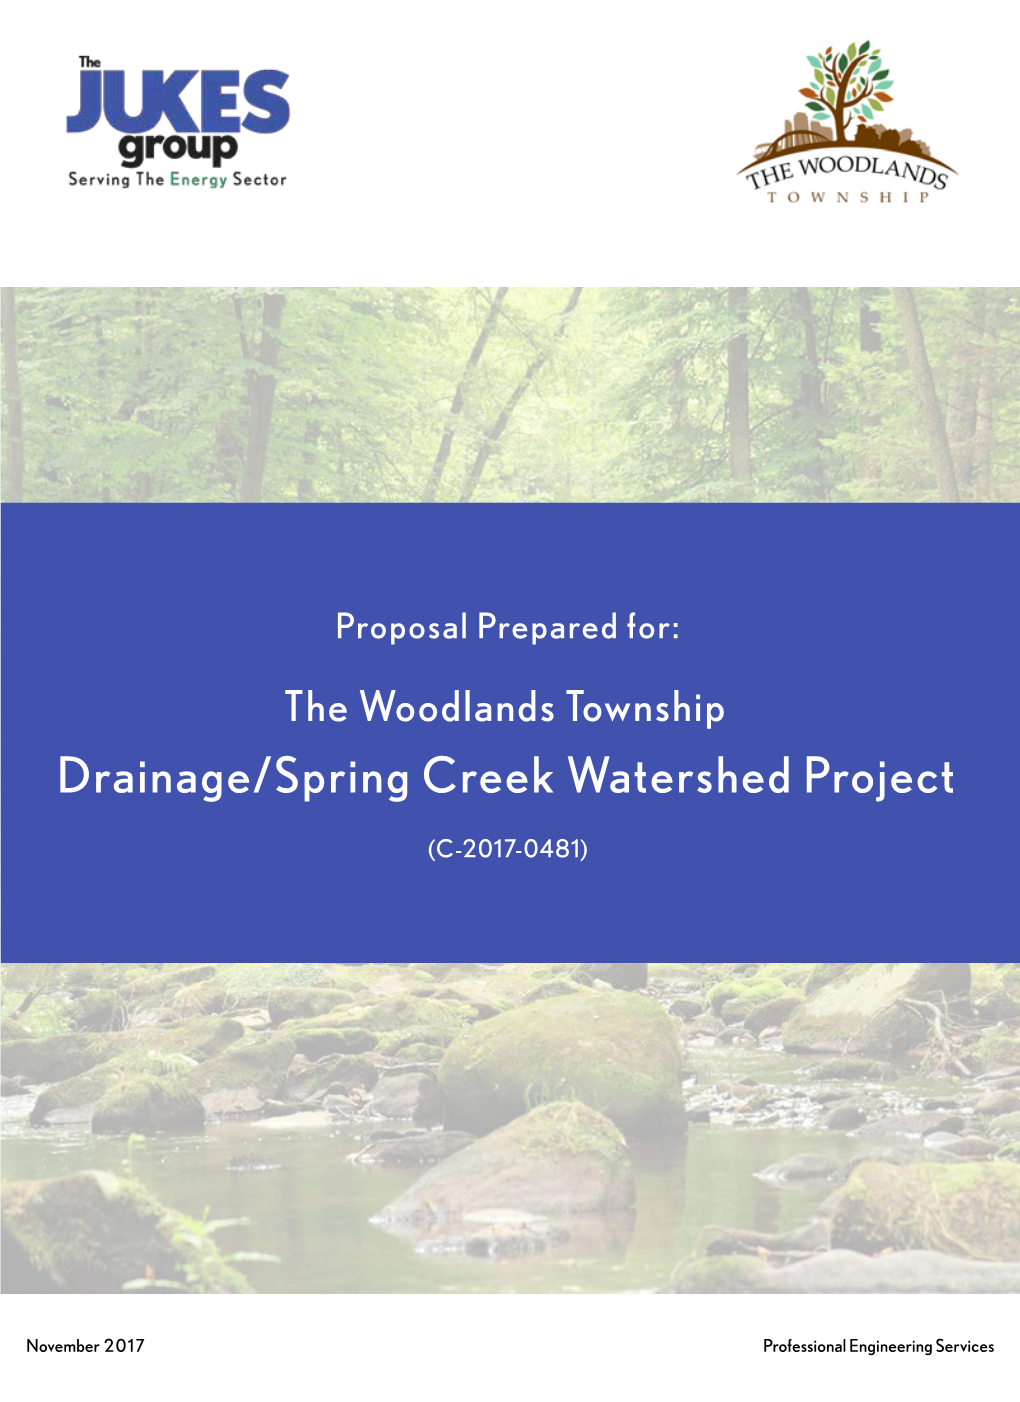 Drainage/Spring Creek Watershed Project